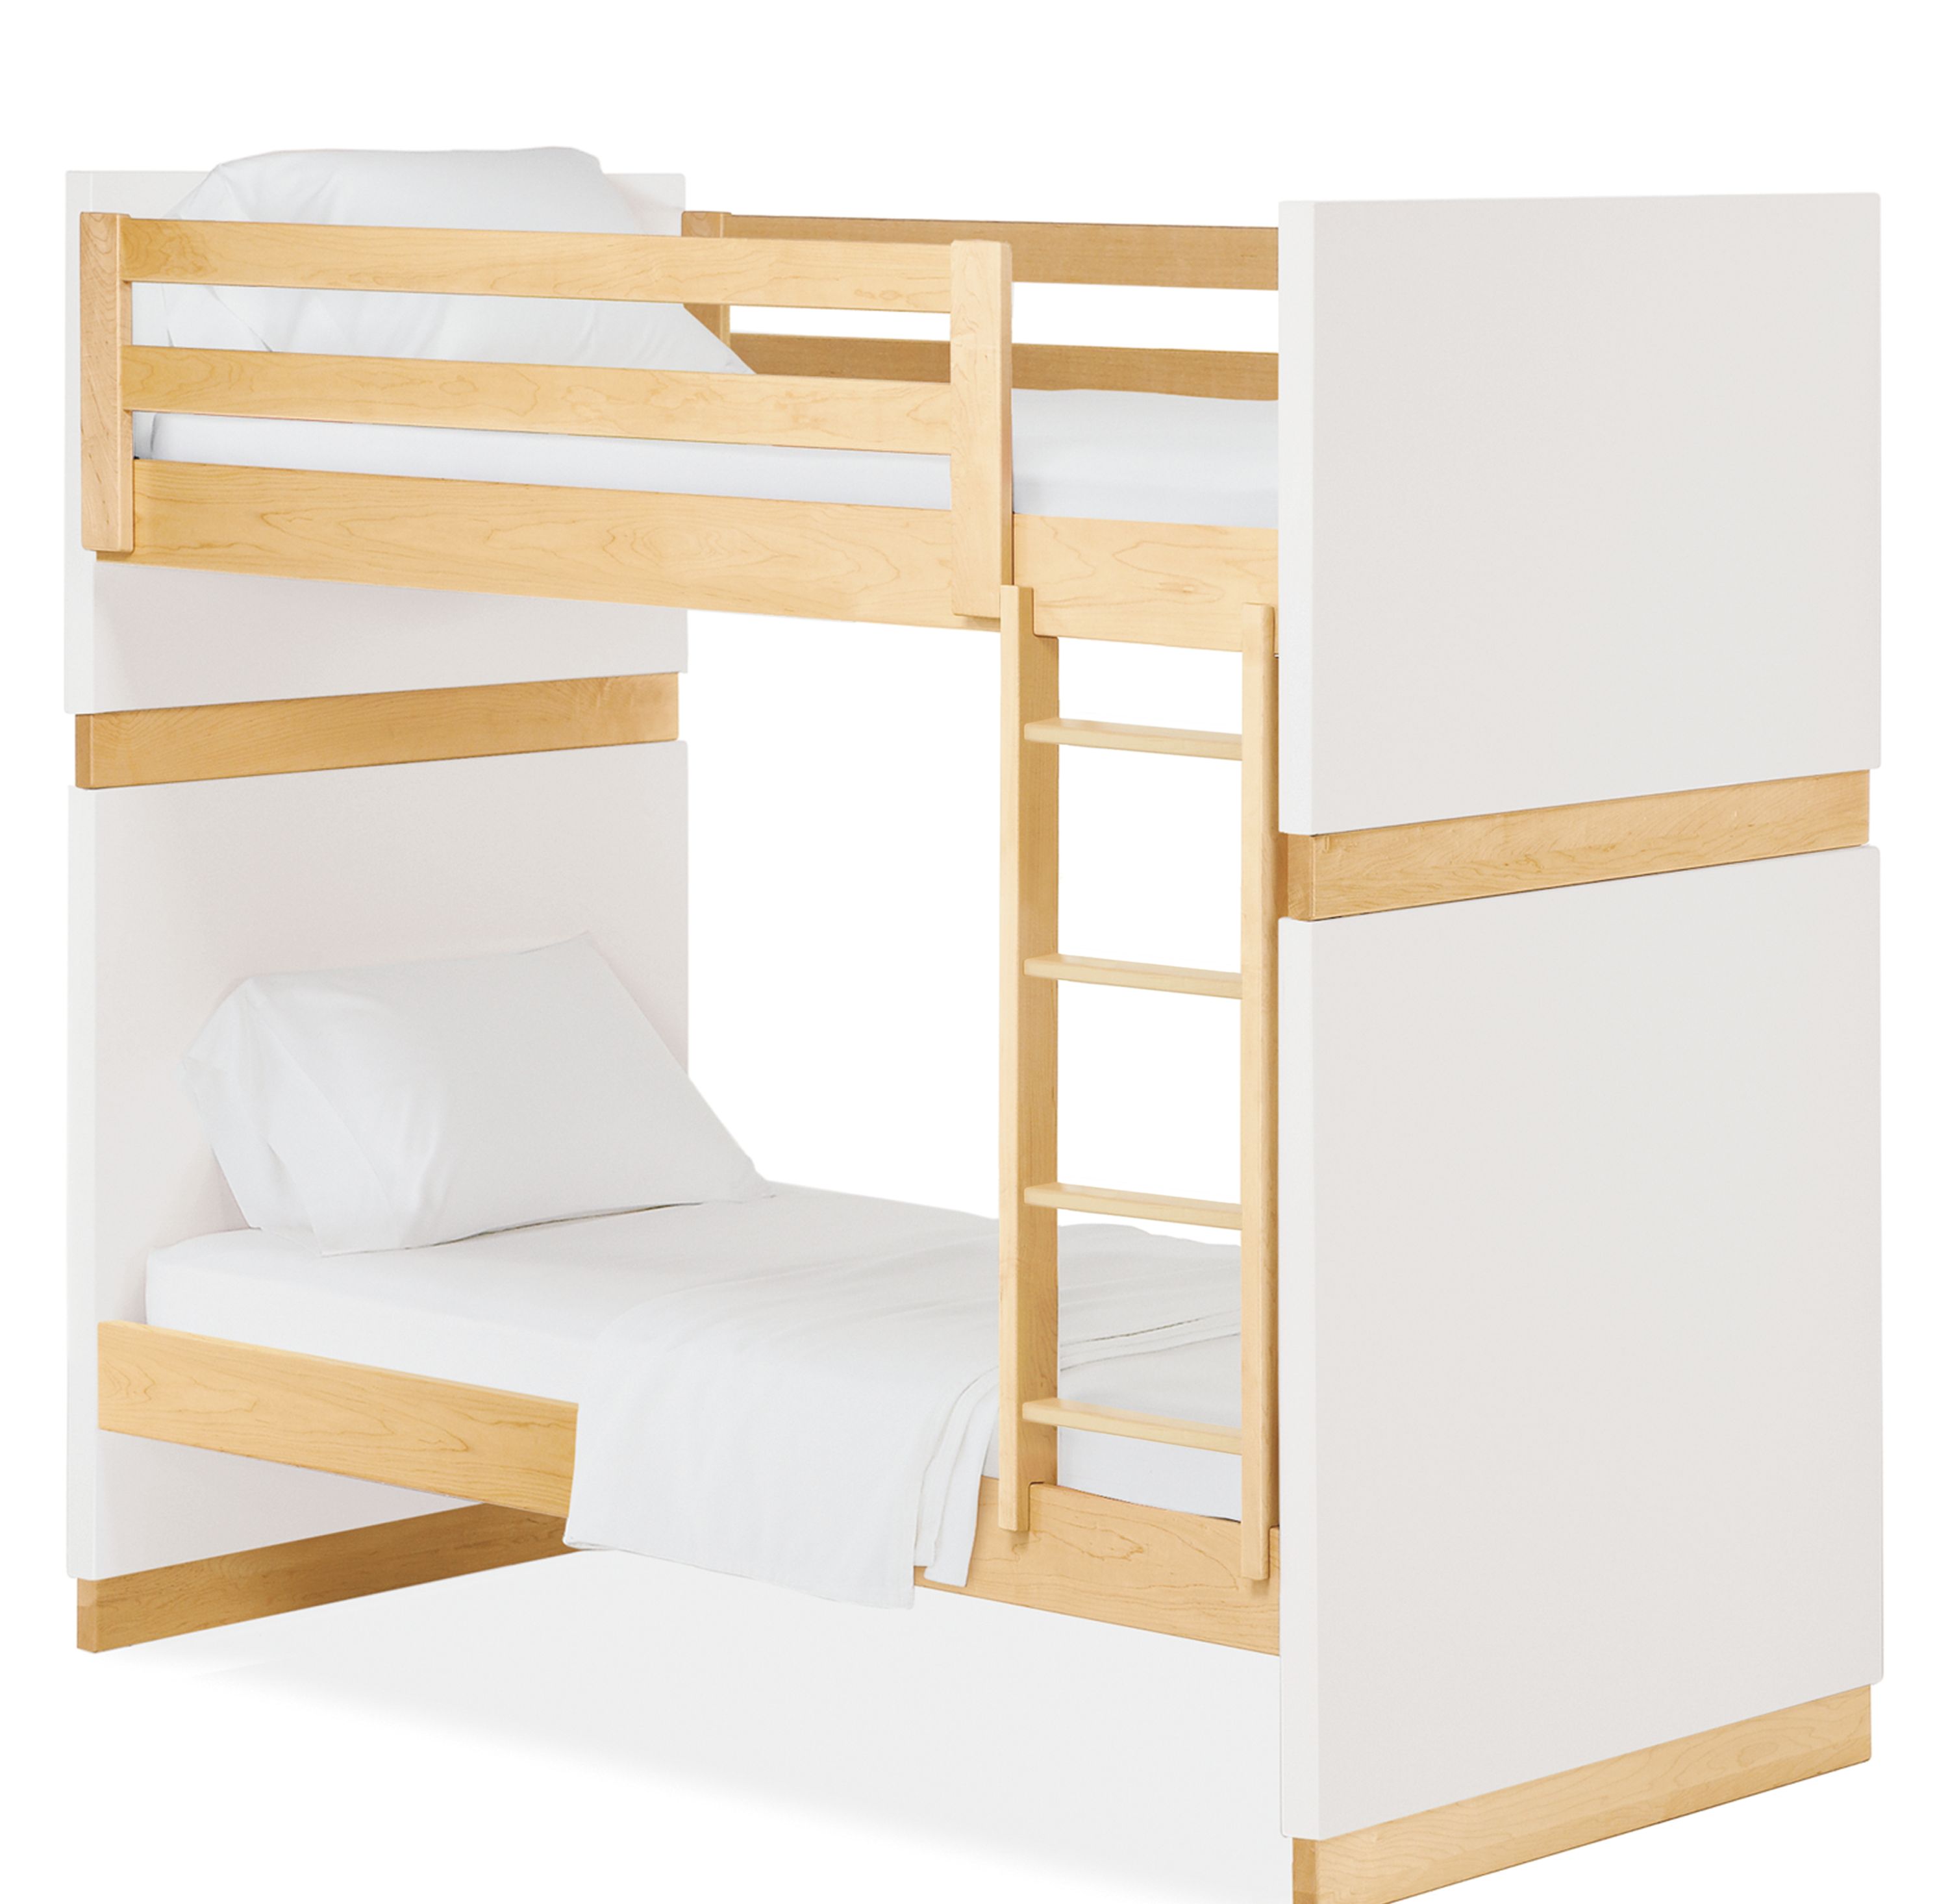 Moda Bunk Beds Twin Over, Wooden Bunk Beds That Separate